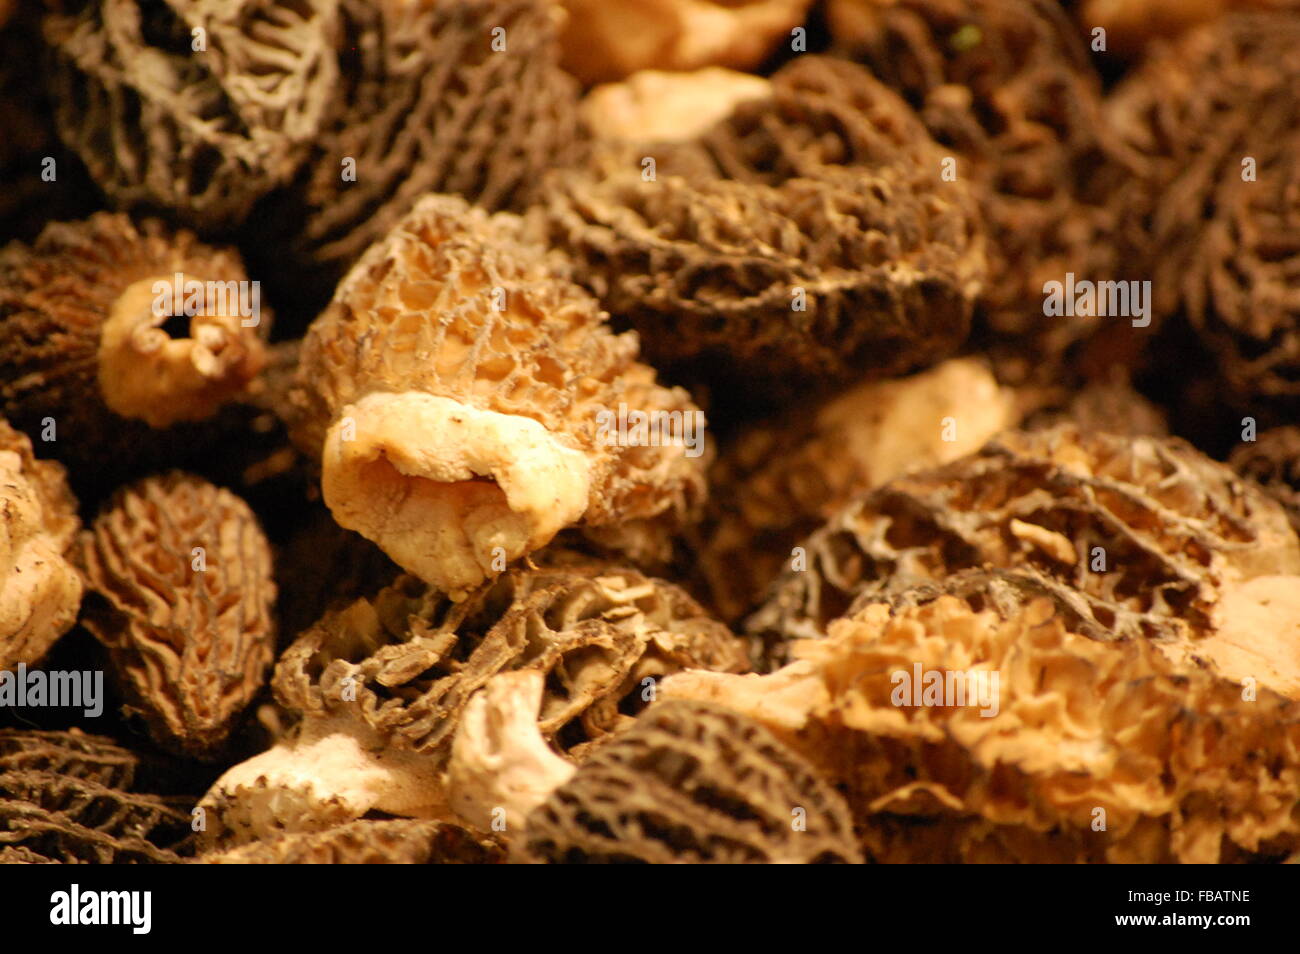 Morel Mushrooms in Pike's Place Market Stock Photo